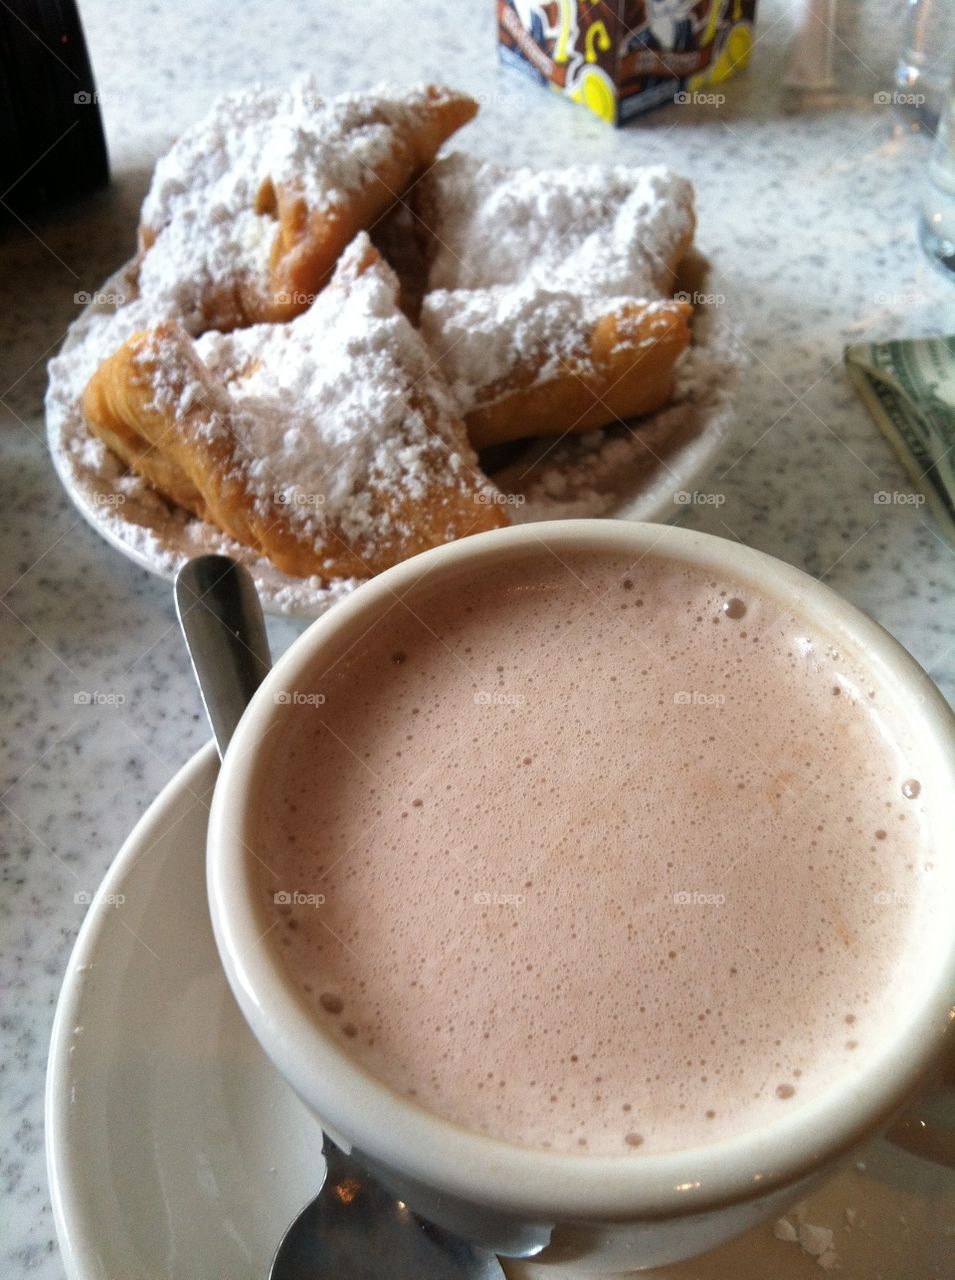 Eating beignets at Cafe du Monde in New Orleans Louisiana. 